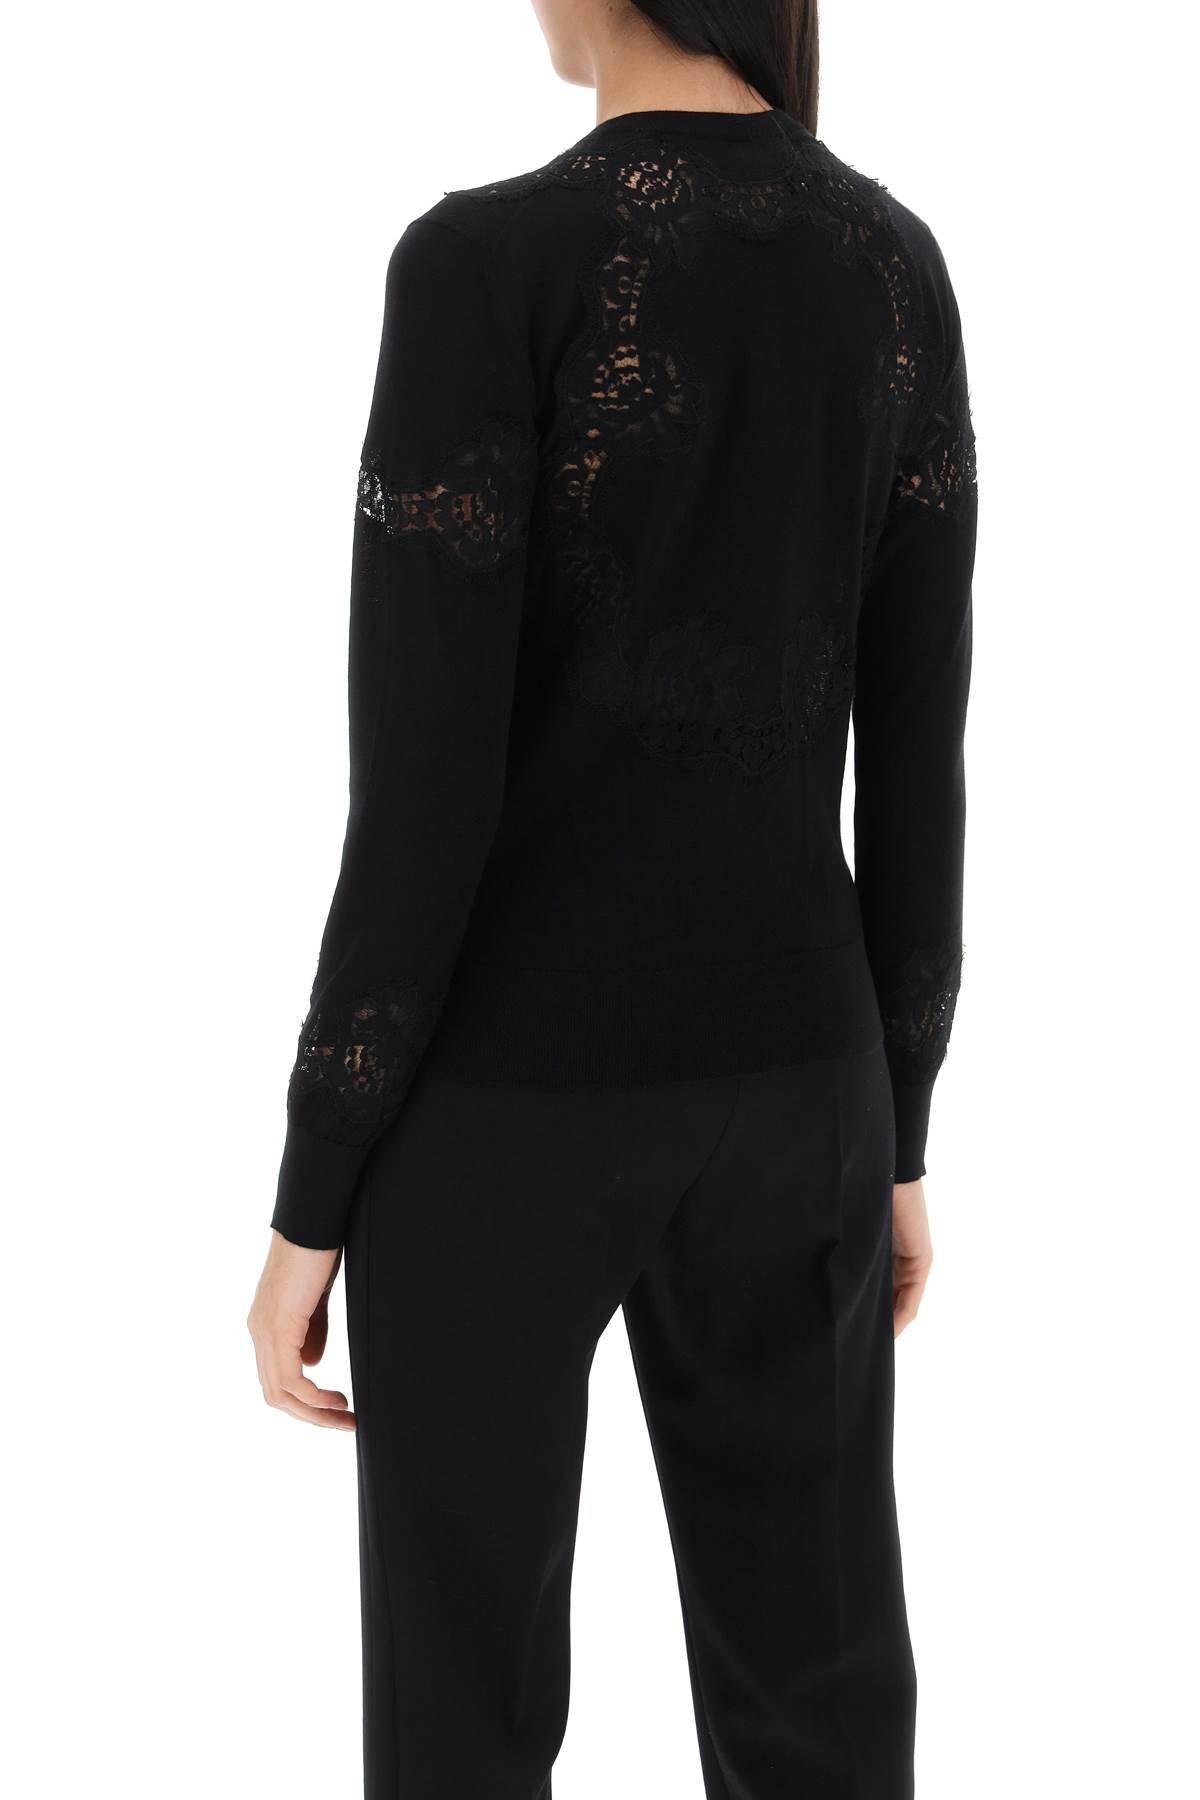 Dolce & gabbana lace-insert cardigan with eight-2